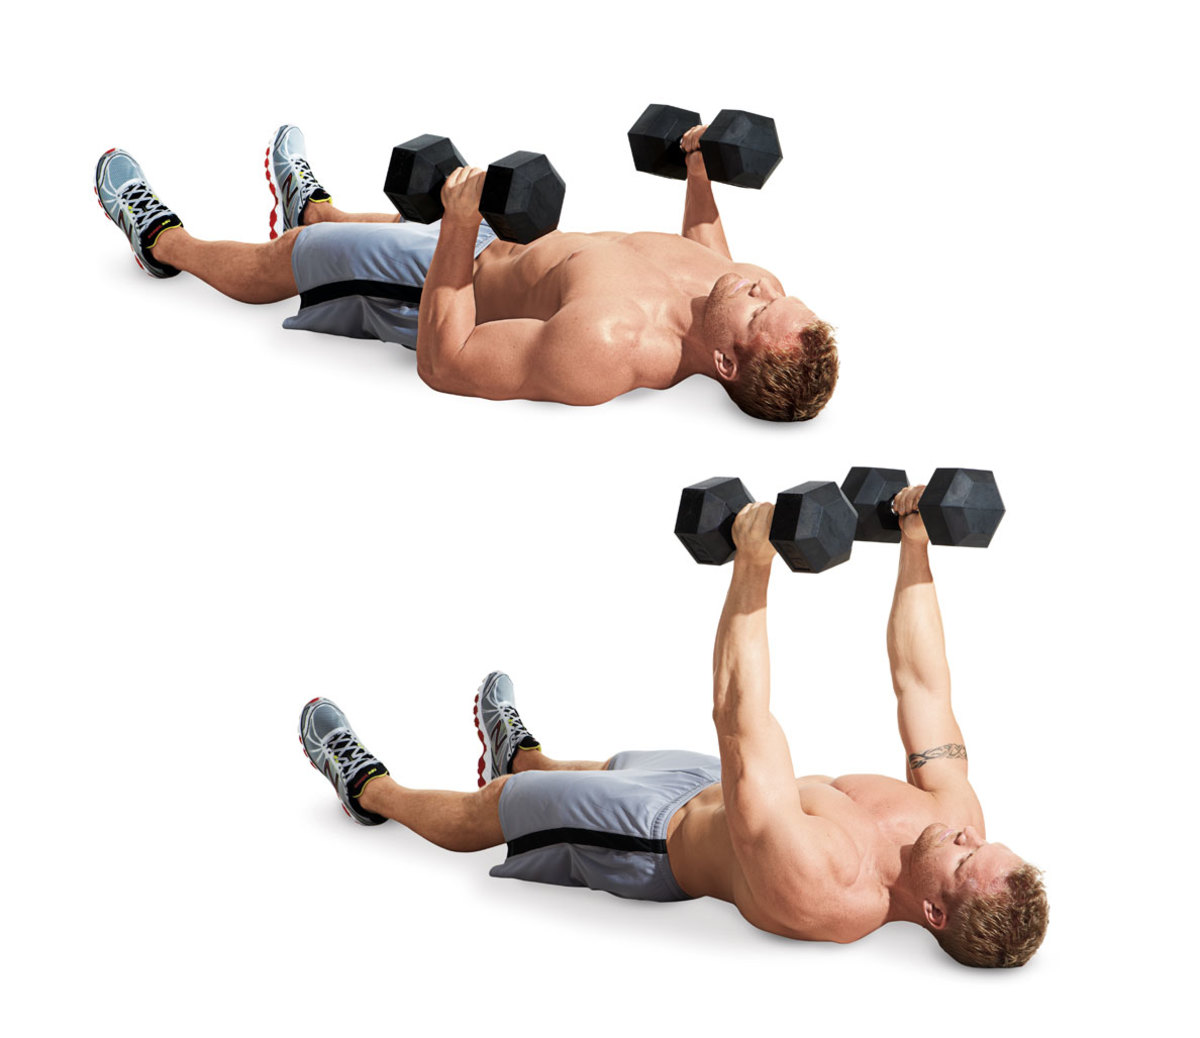 The 8 best chest exercises that don't require a bench - Men's Journal